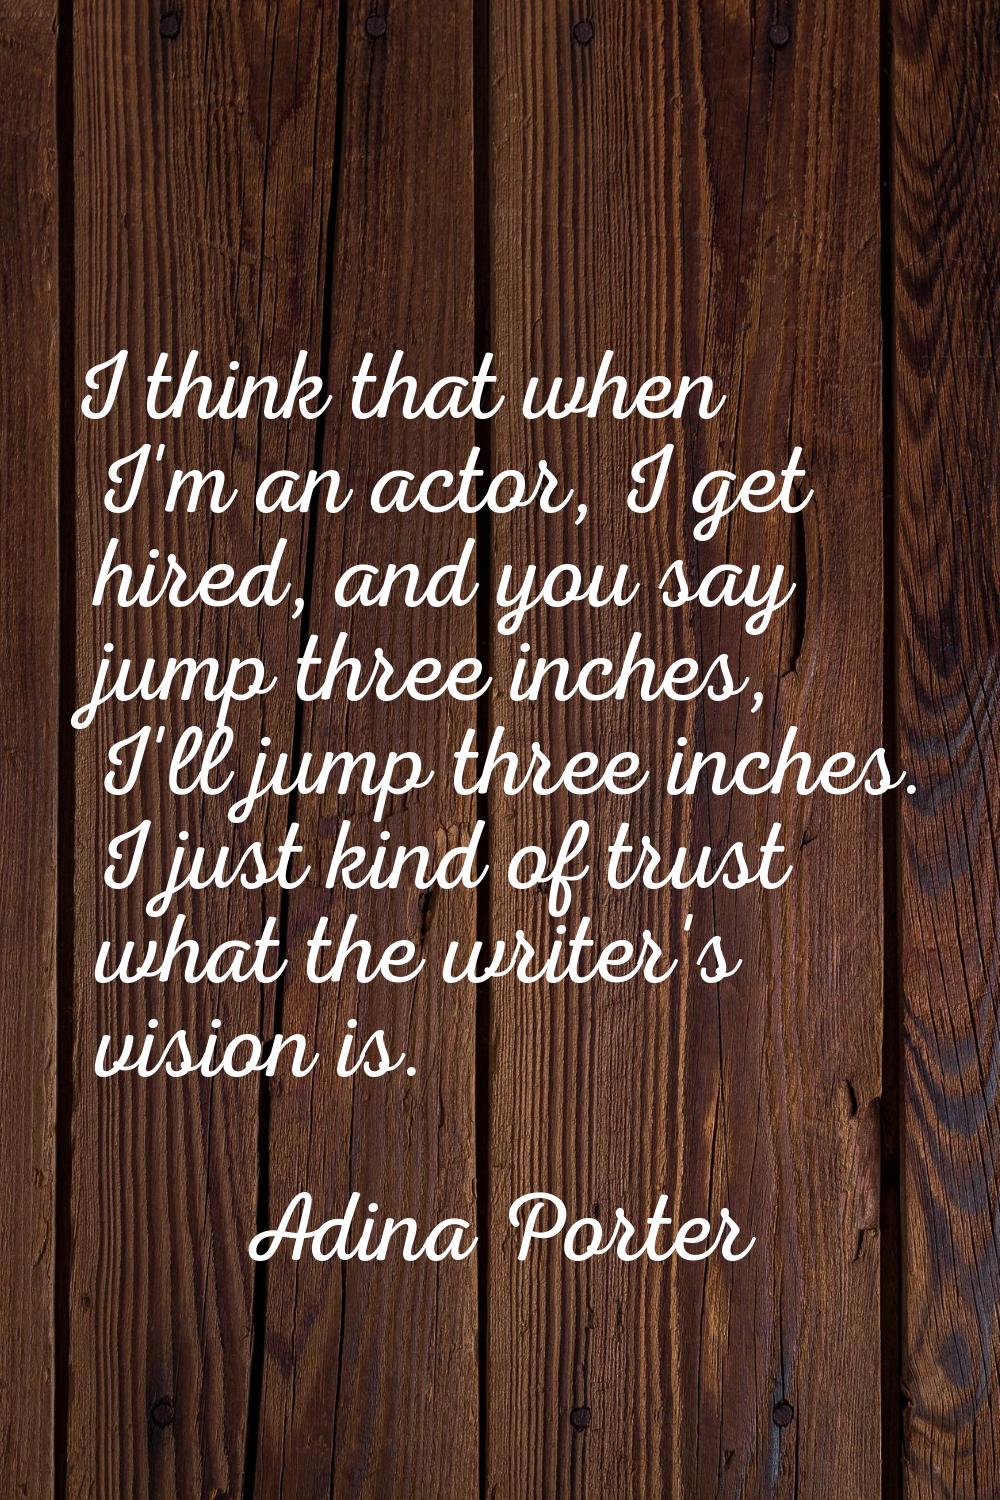 I think that when I'm an actor, I get hired, and you say jump three inches, I'll jump three inches.